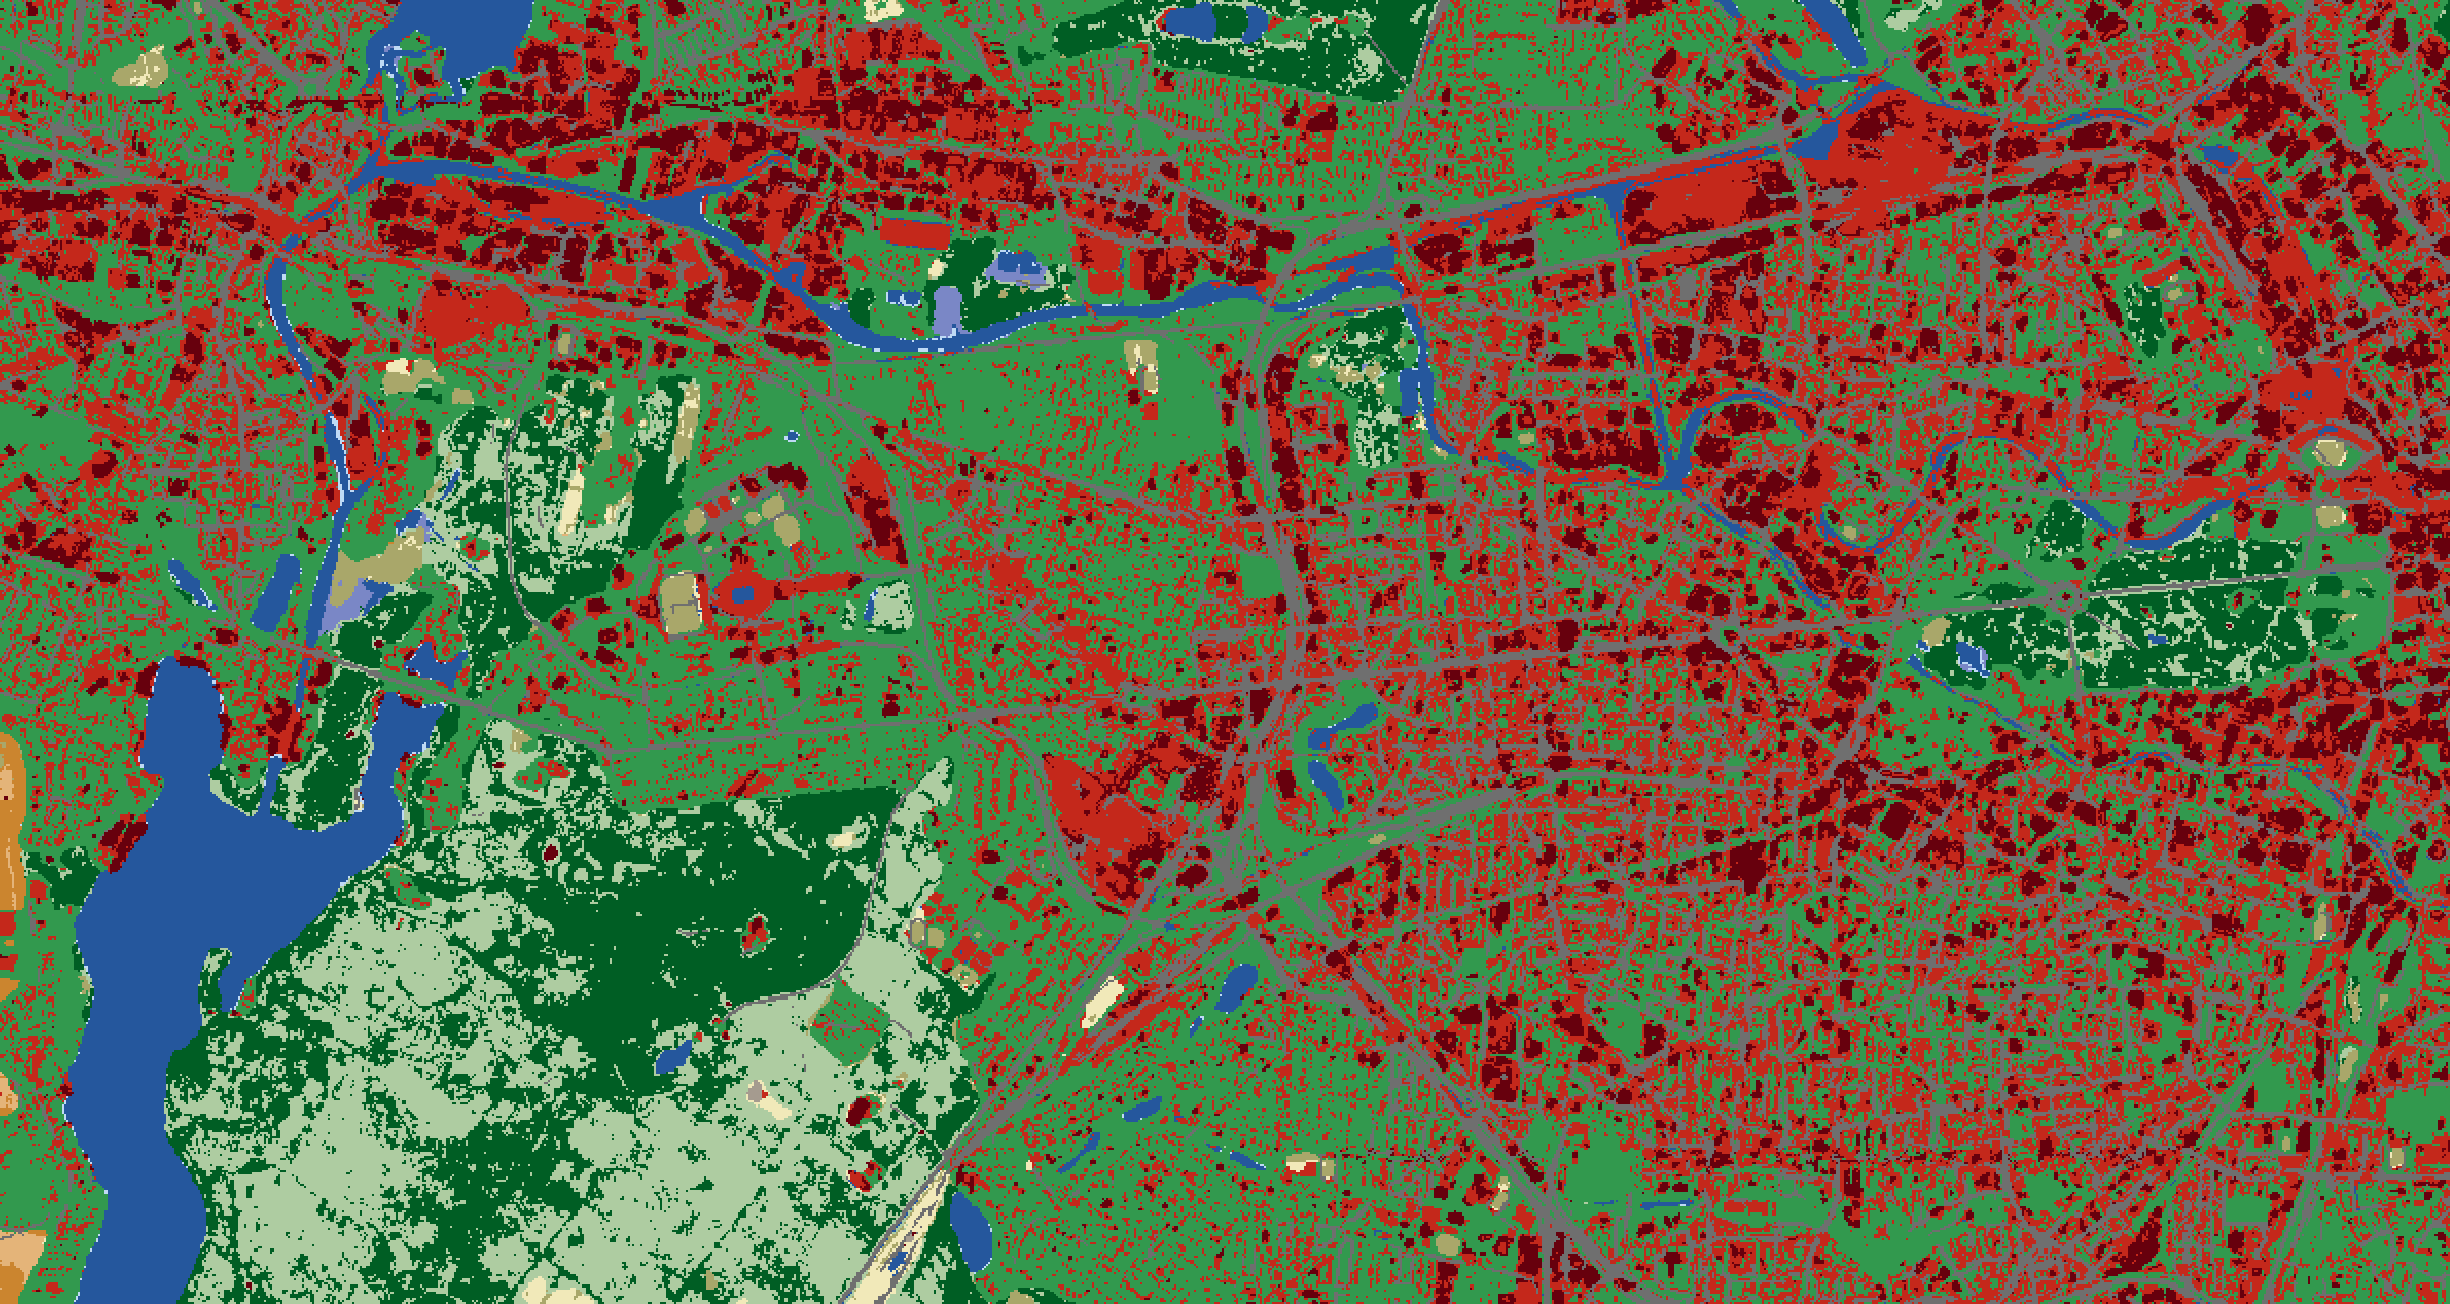 Sample image of 3m land cover over Berlin, Germany.